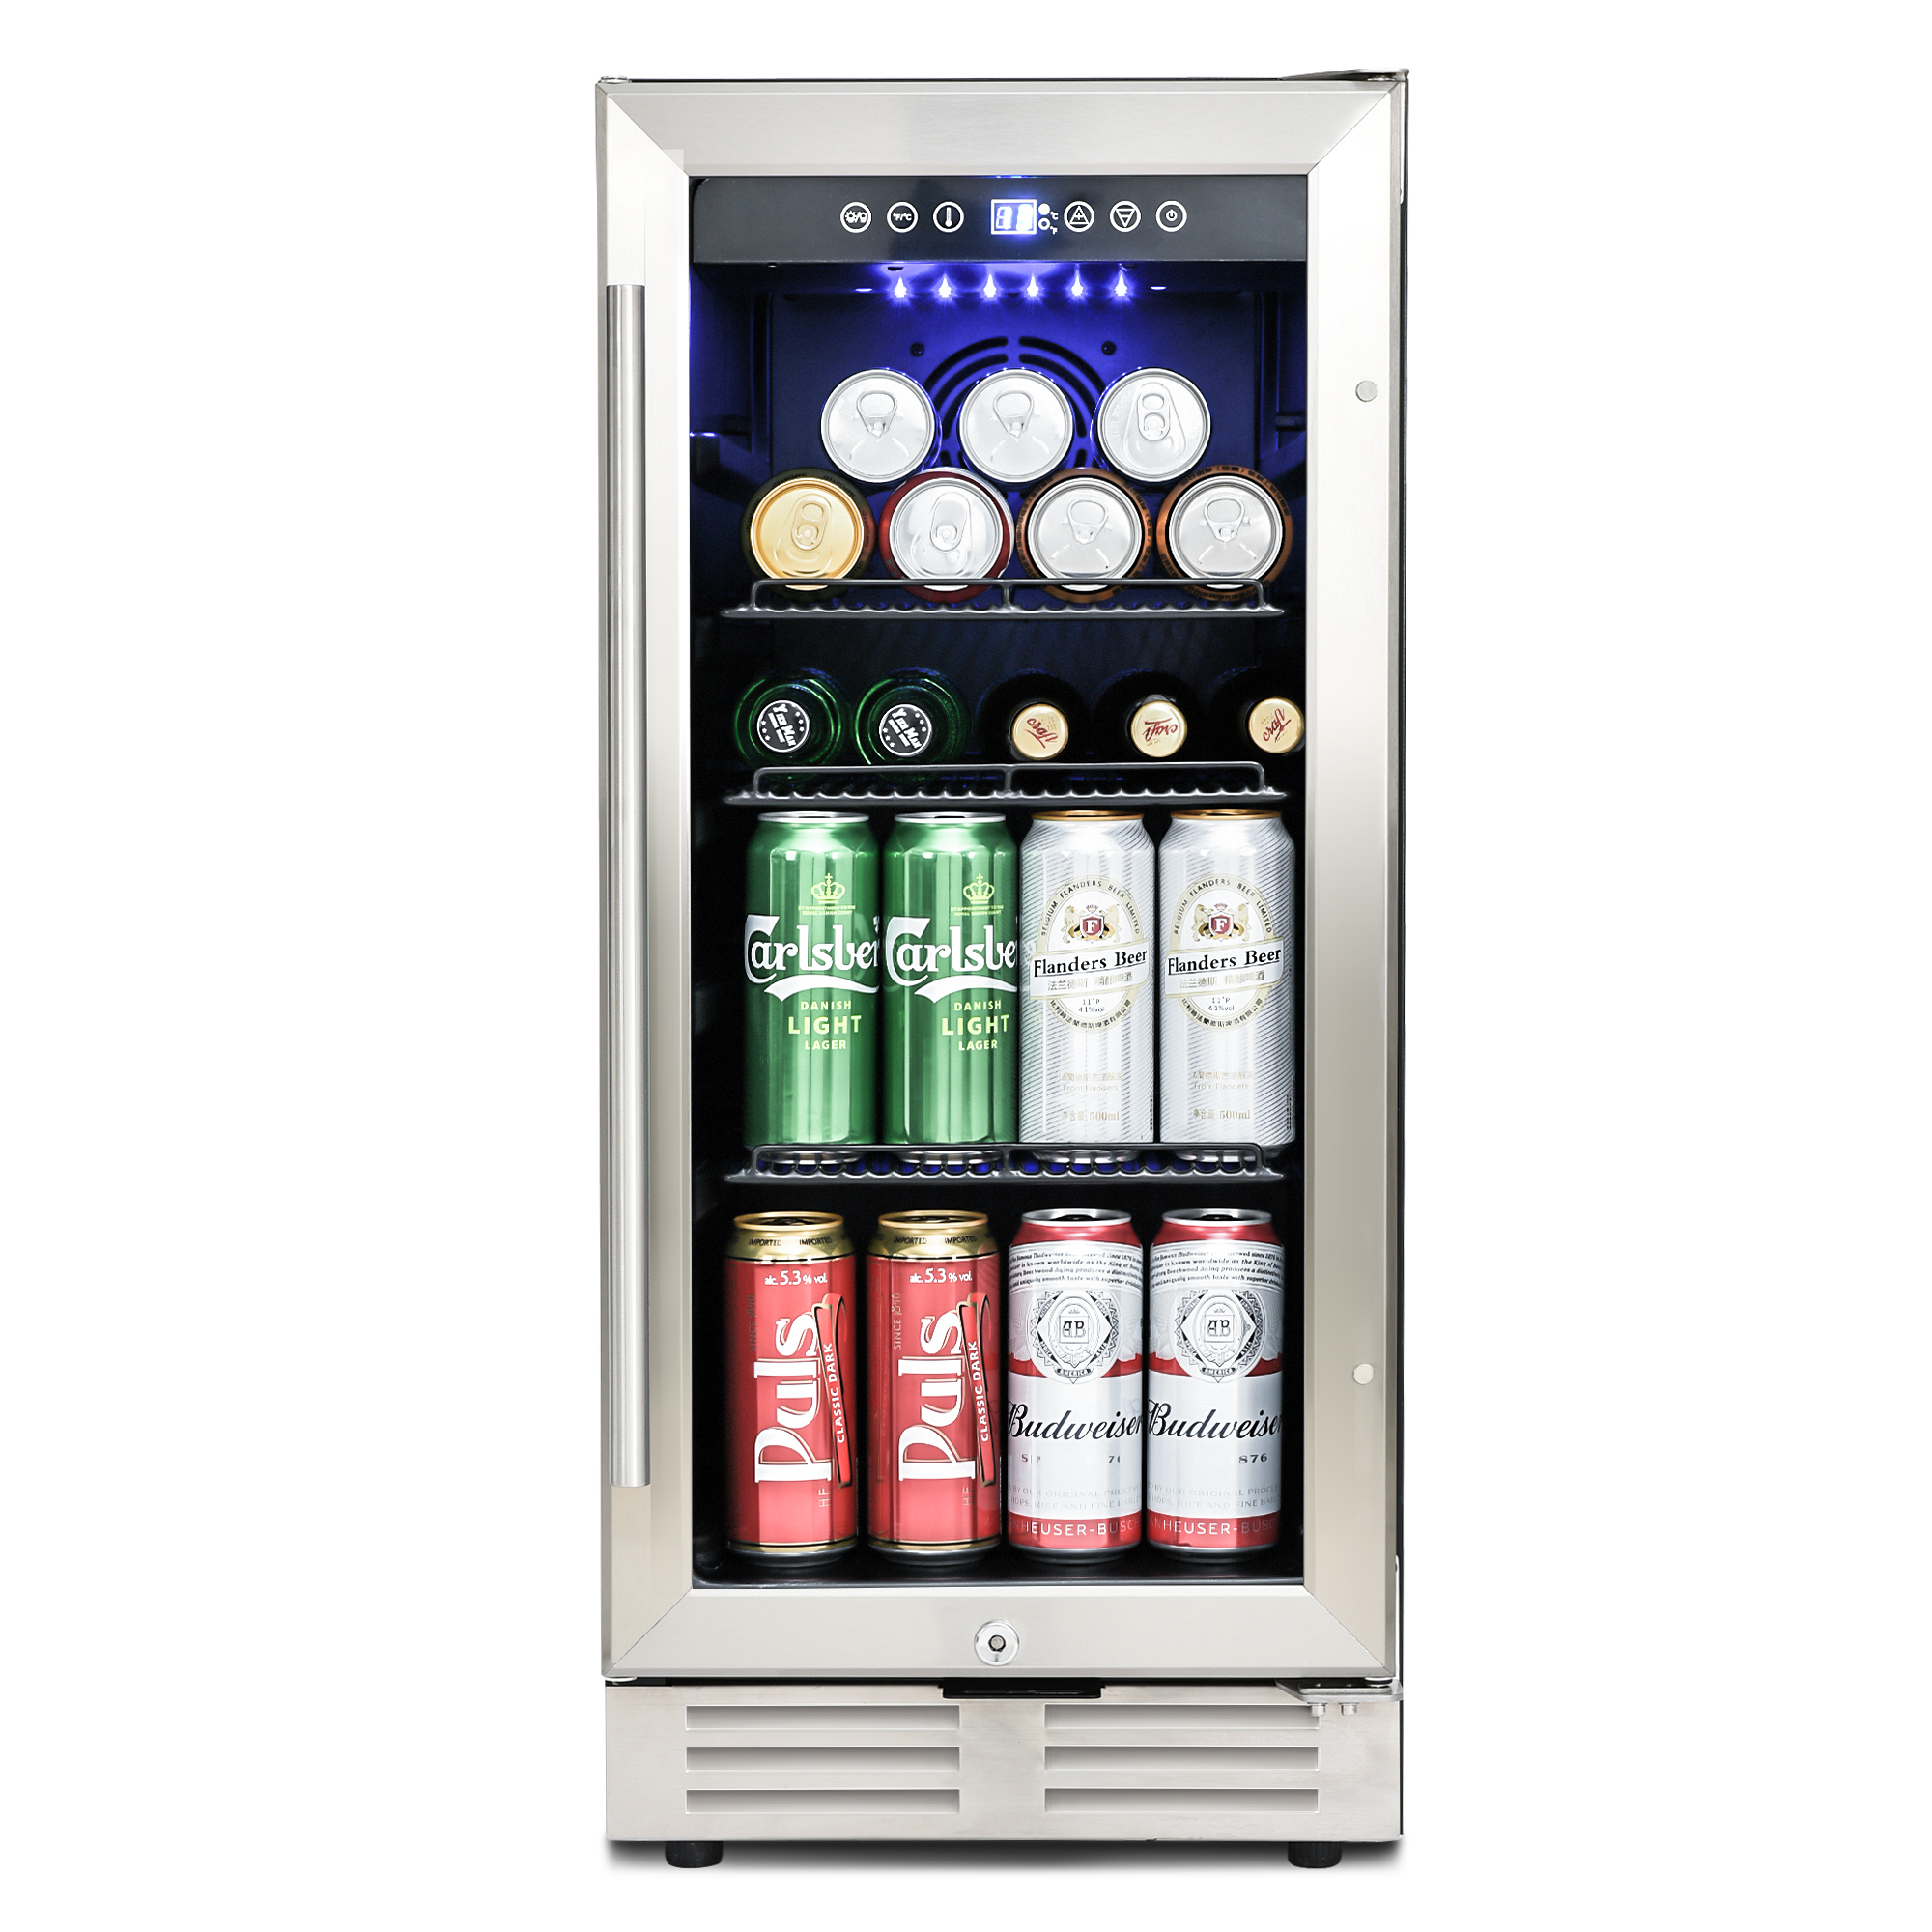 15 Inch Mini Beverage Cooler with 120 Cans Capacity for Soda, Water, Beer or Wine. Quiet Operation, Compressor Cooling System, Energy Saving, Adjustable Shelves, Blue Interior Light.-Boyel Living